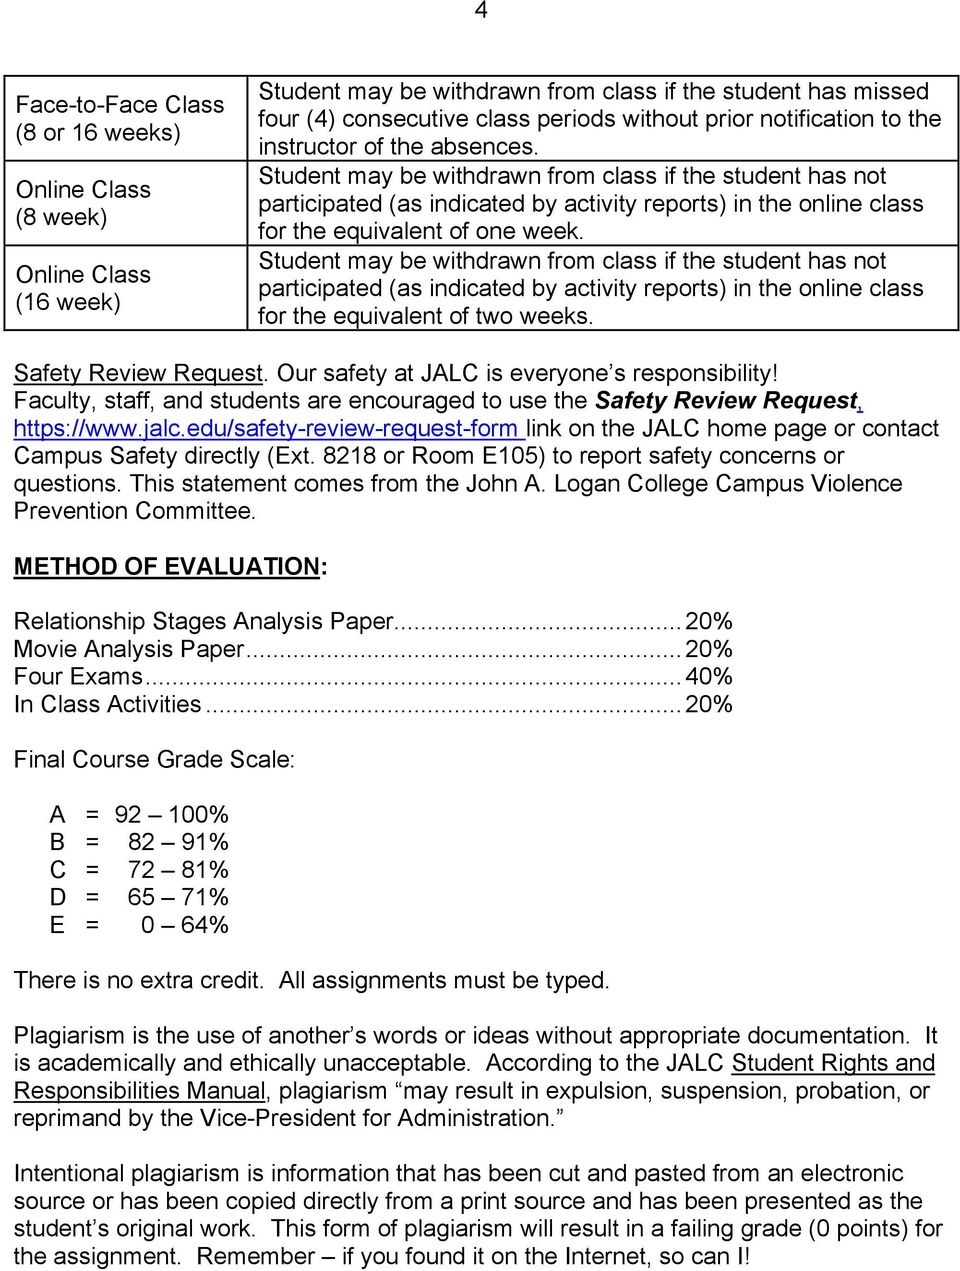 Student may be withdrawn from class if the student has not participated (as indicated by activity reports) in the online class for the equivalent of one week.